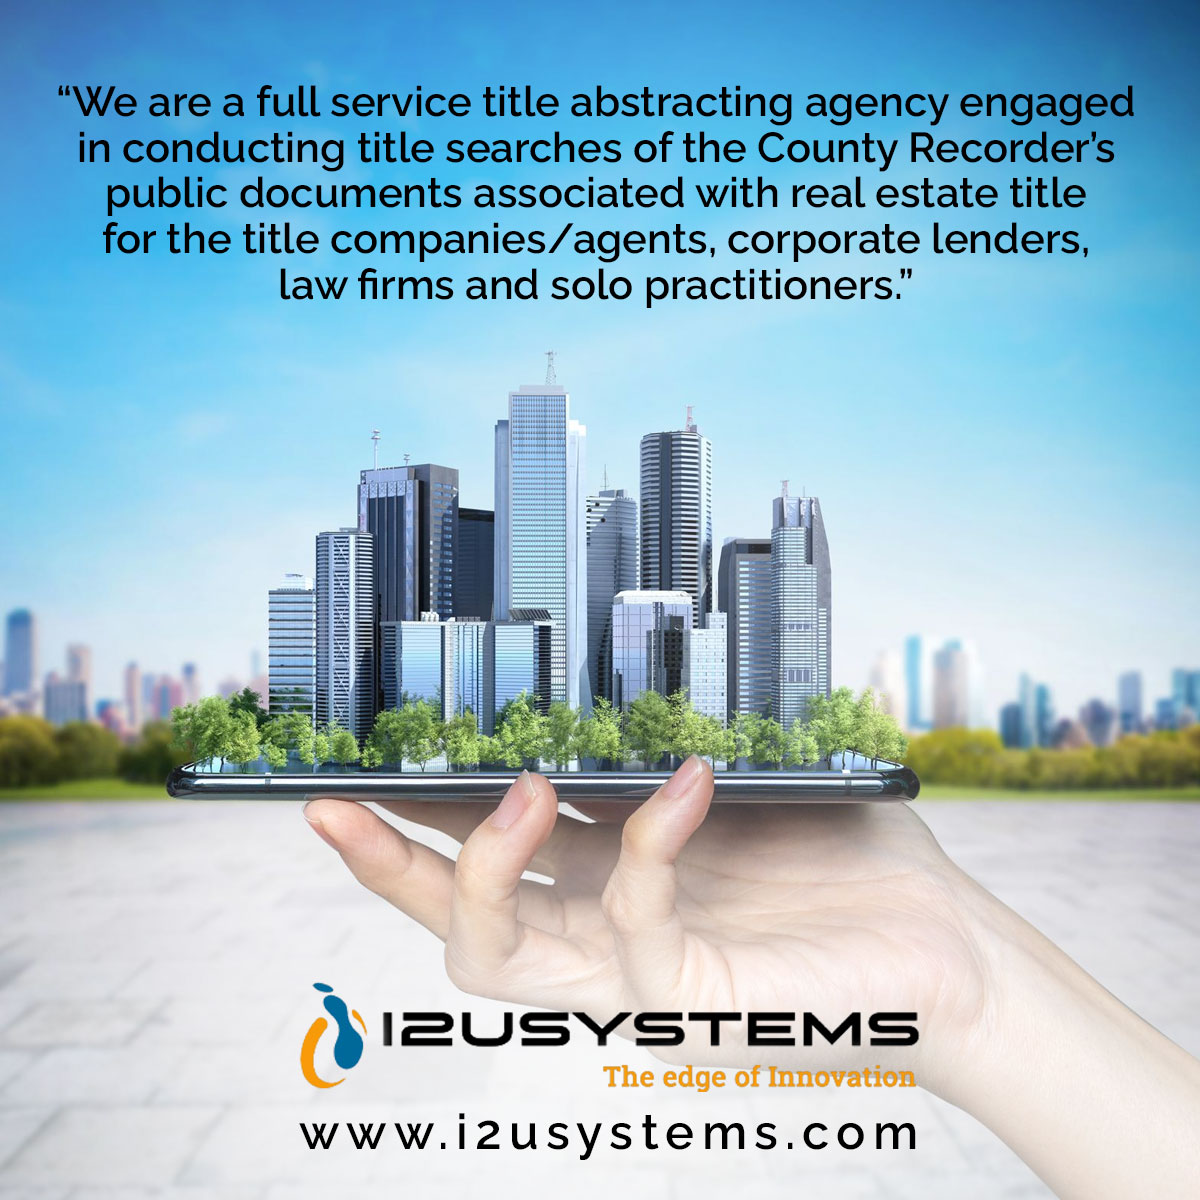 We are a full-service title abstracting agency engaged in conducting title searches of the County Recorder’s public documents associated with real estate title.

#i2usystems #c2crequirements  #directclient   #titleservices #leaders #agents #lawfirms #practiotioners #documents